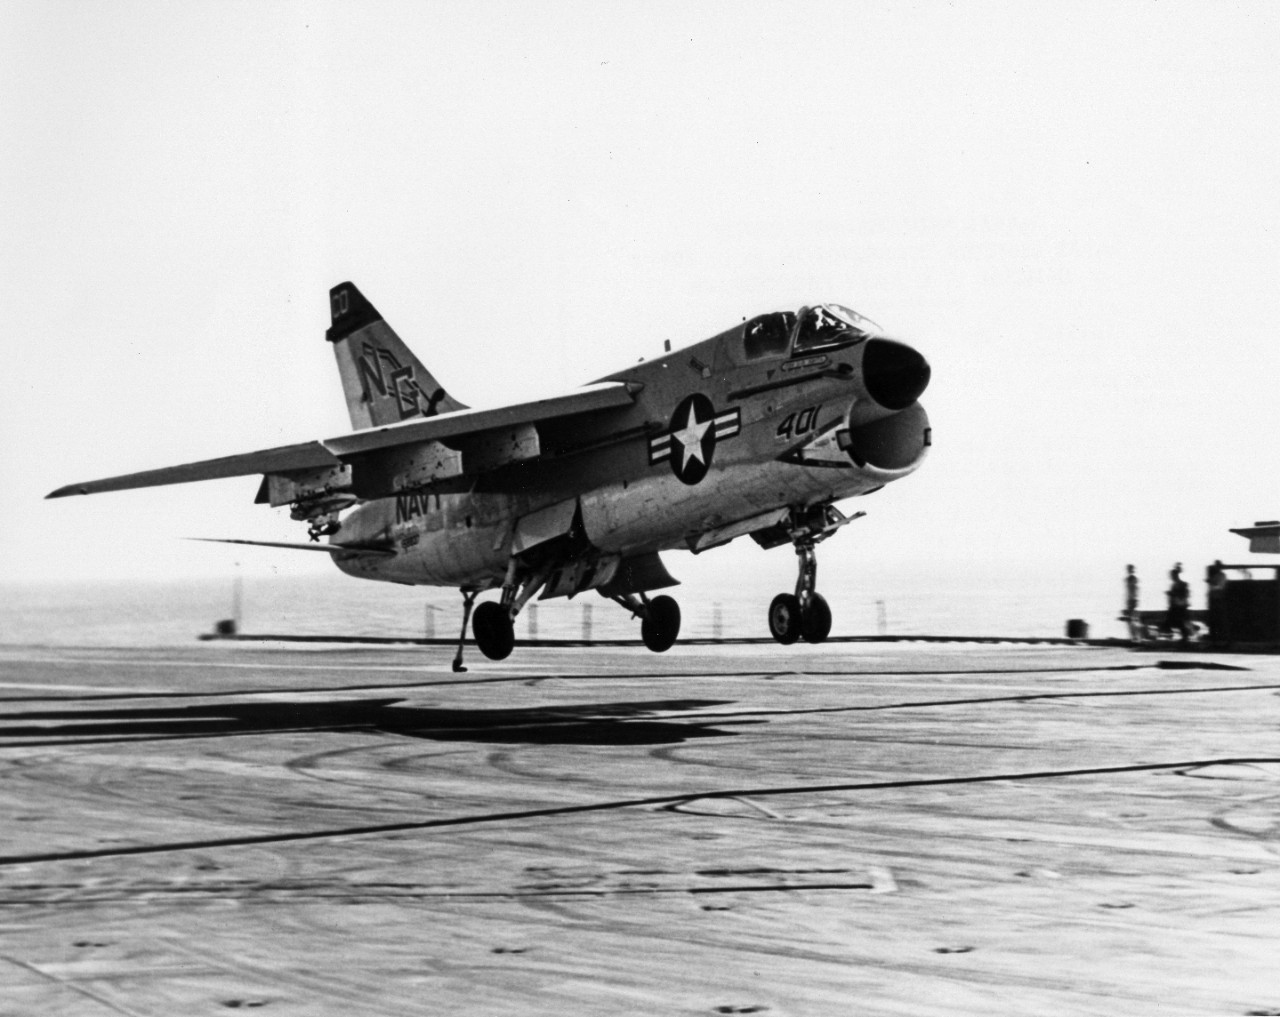 An A-7E Corsair II attack aircraft from Attack Squadron 147 (VA-147) prepares to catch the wire during a recovery on board the attack aircraft carrier USS Constellation (CVA-64). The vessel is involved with Operation Midlink '74, the Central Treaty Organization naval exercise.